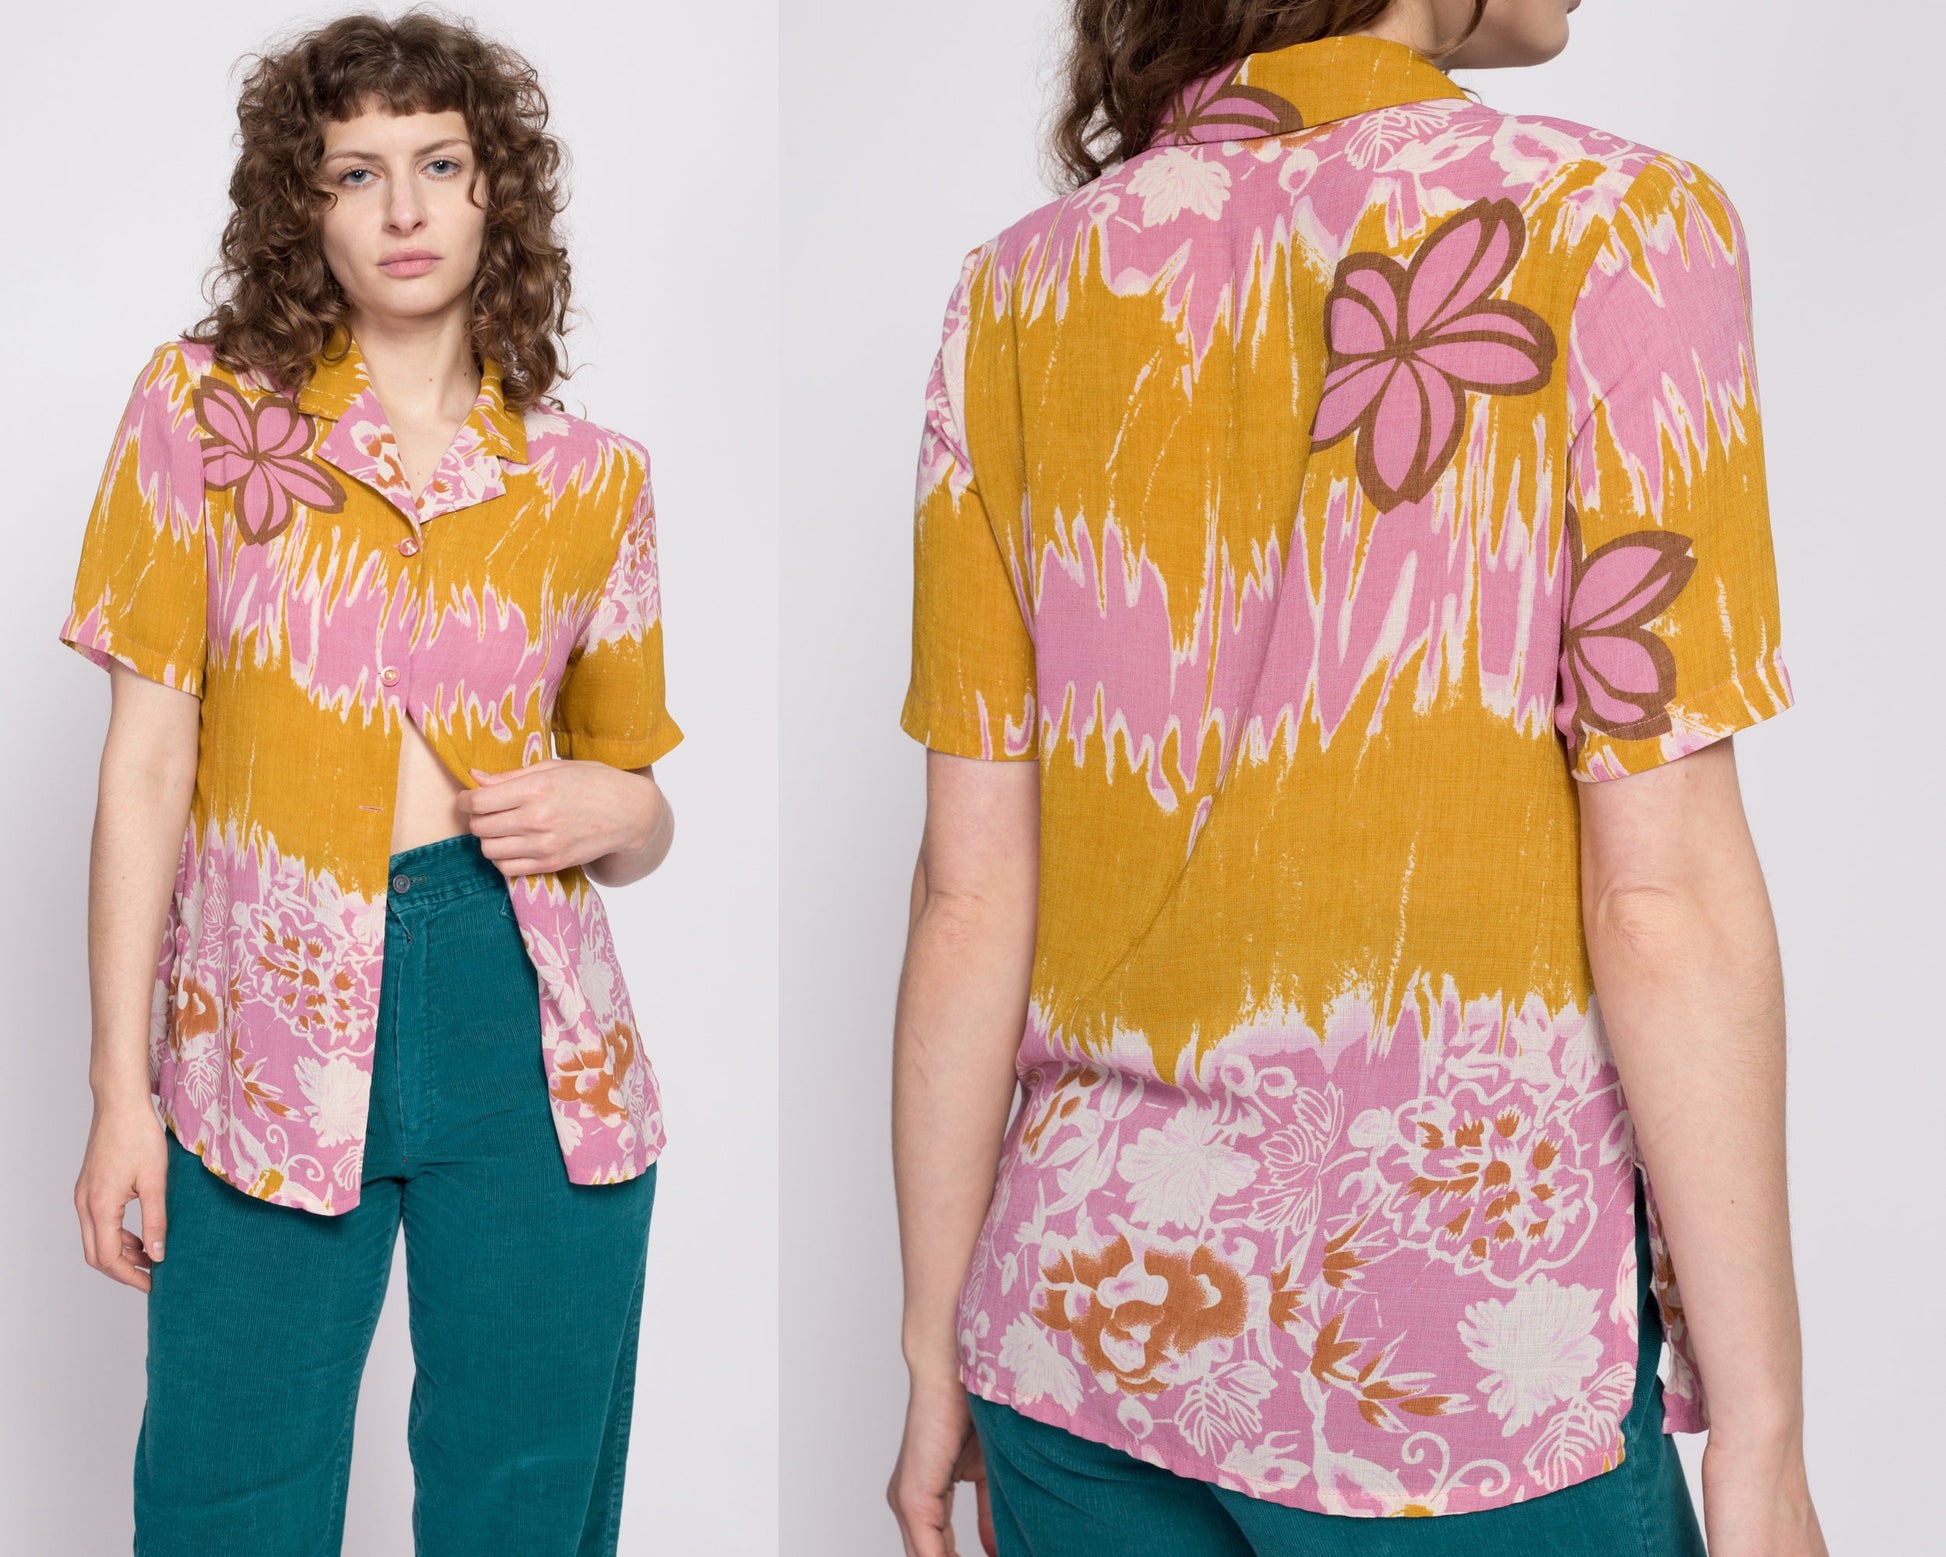 90s Tropical Floral Print Blouse - Medium | Vintage Boho Button Up Short Sleeve Collared Top